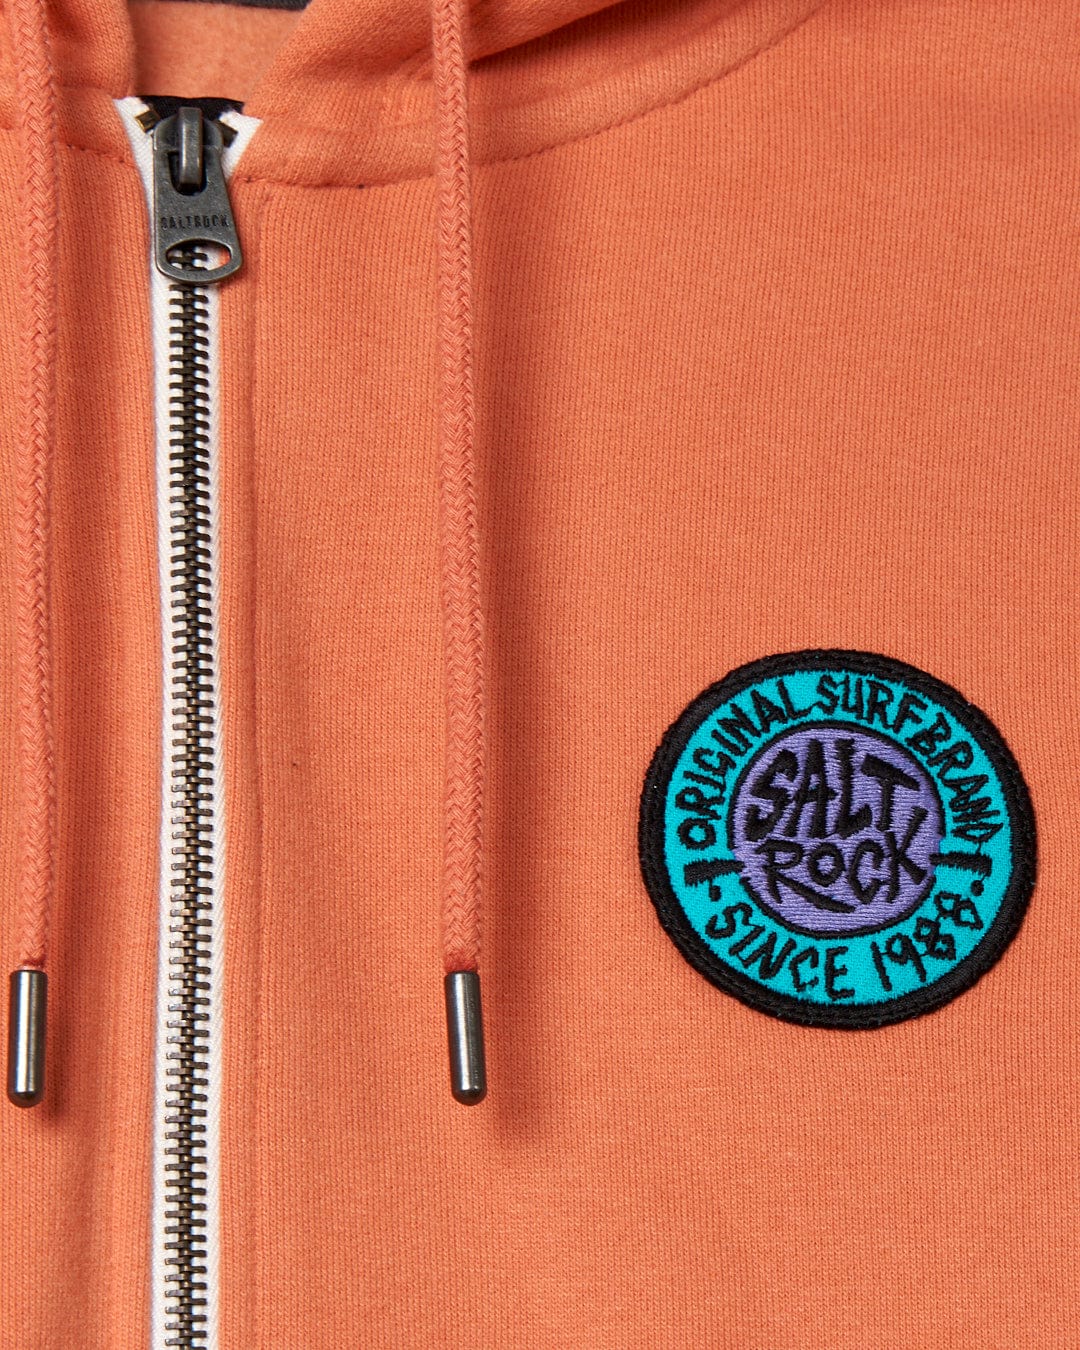 Close-up of a coral-colored SR Original - Recycled Mens Zip hoodie - Orange with a zipper and a circular "Saltrock retro surf brand" patch on the left side.